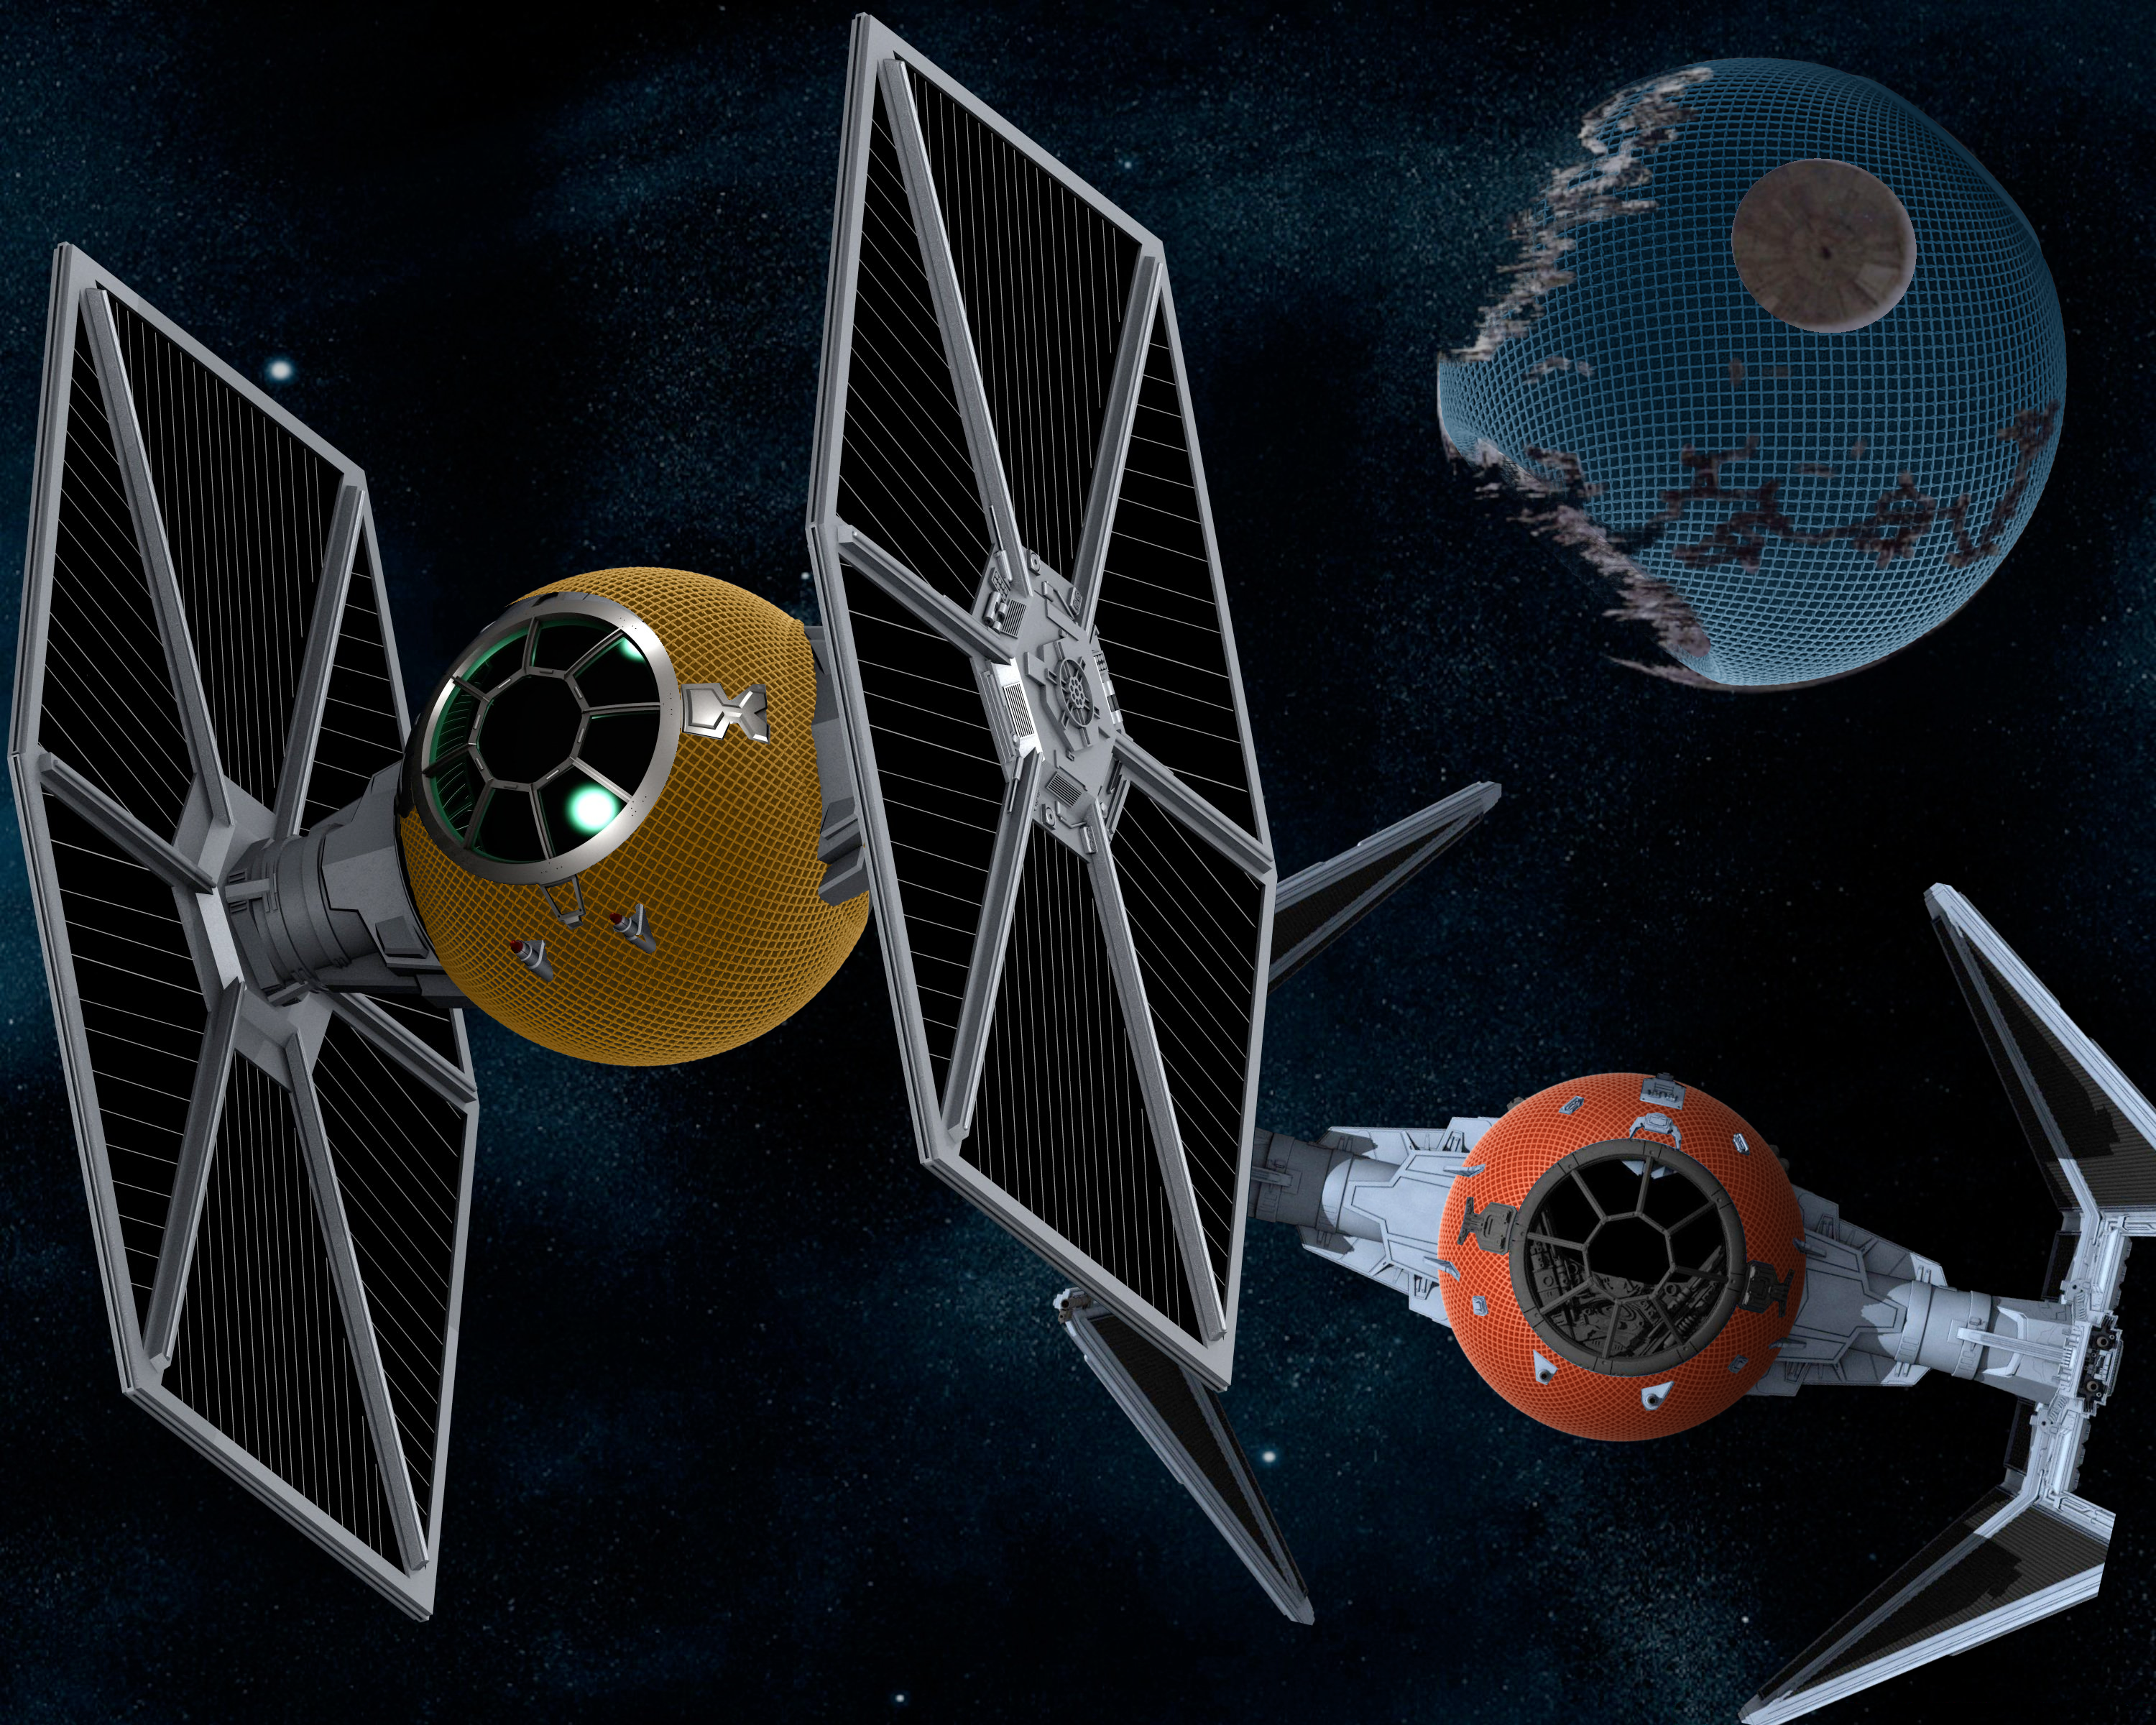 Star Wars TIE fighter, TIE Intercepter, and Deathstar II space scene. Each is overed in Apple HomePod mini fabric pattern in yellow, orange, and Blue respectively.